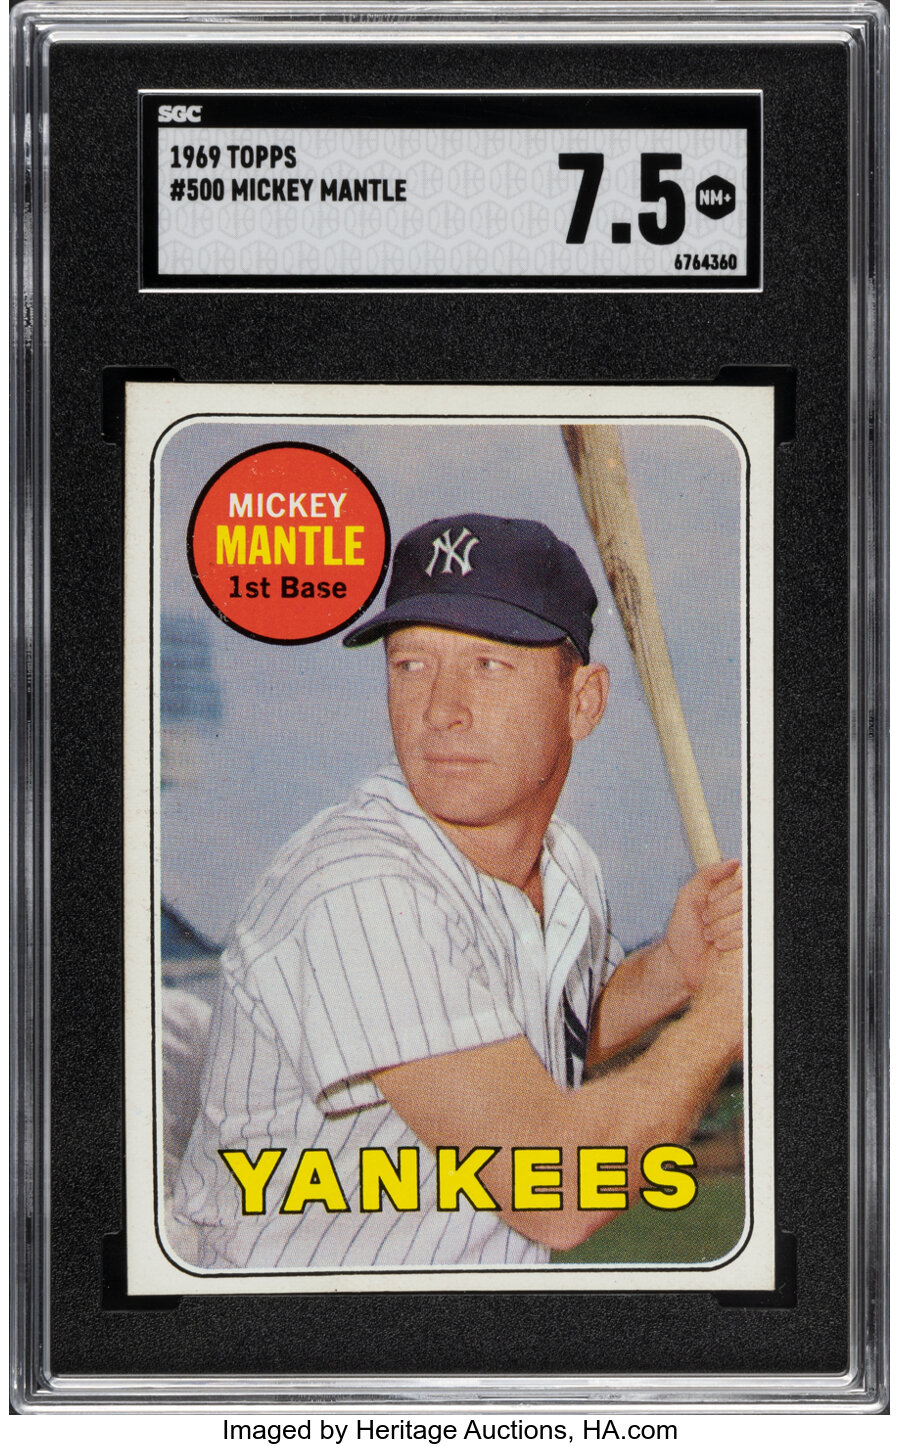 1969 Topps Mickey Mantle (Last Name In Yellow) #500 SGC NM+ 7.5